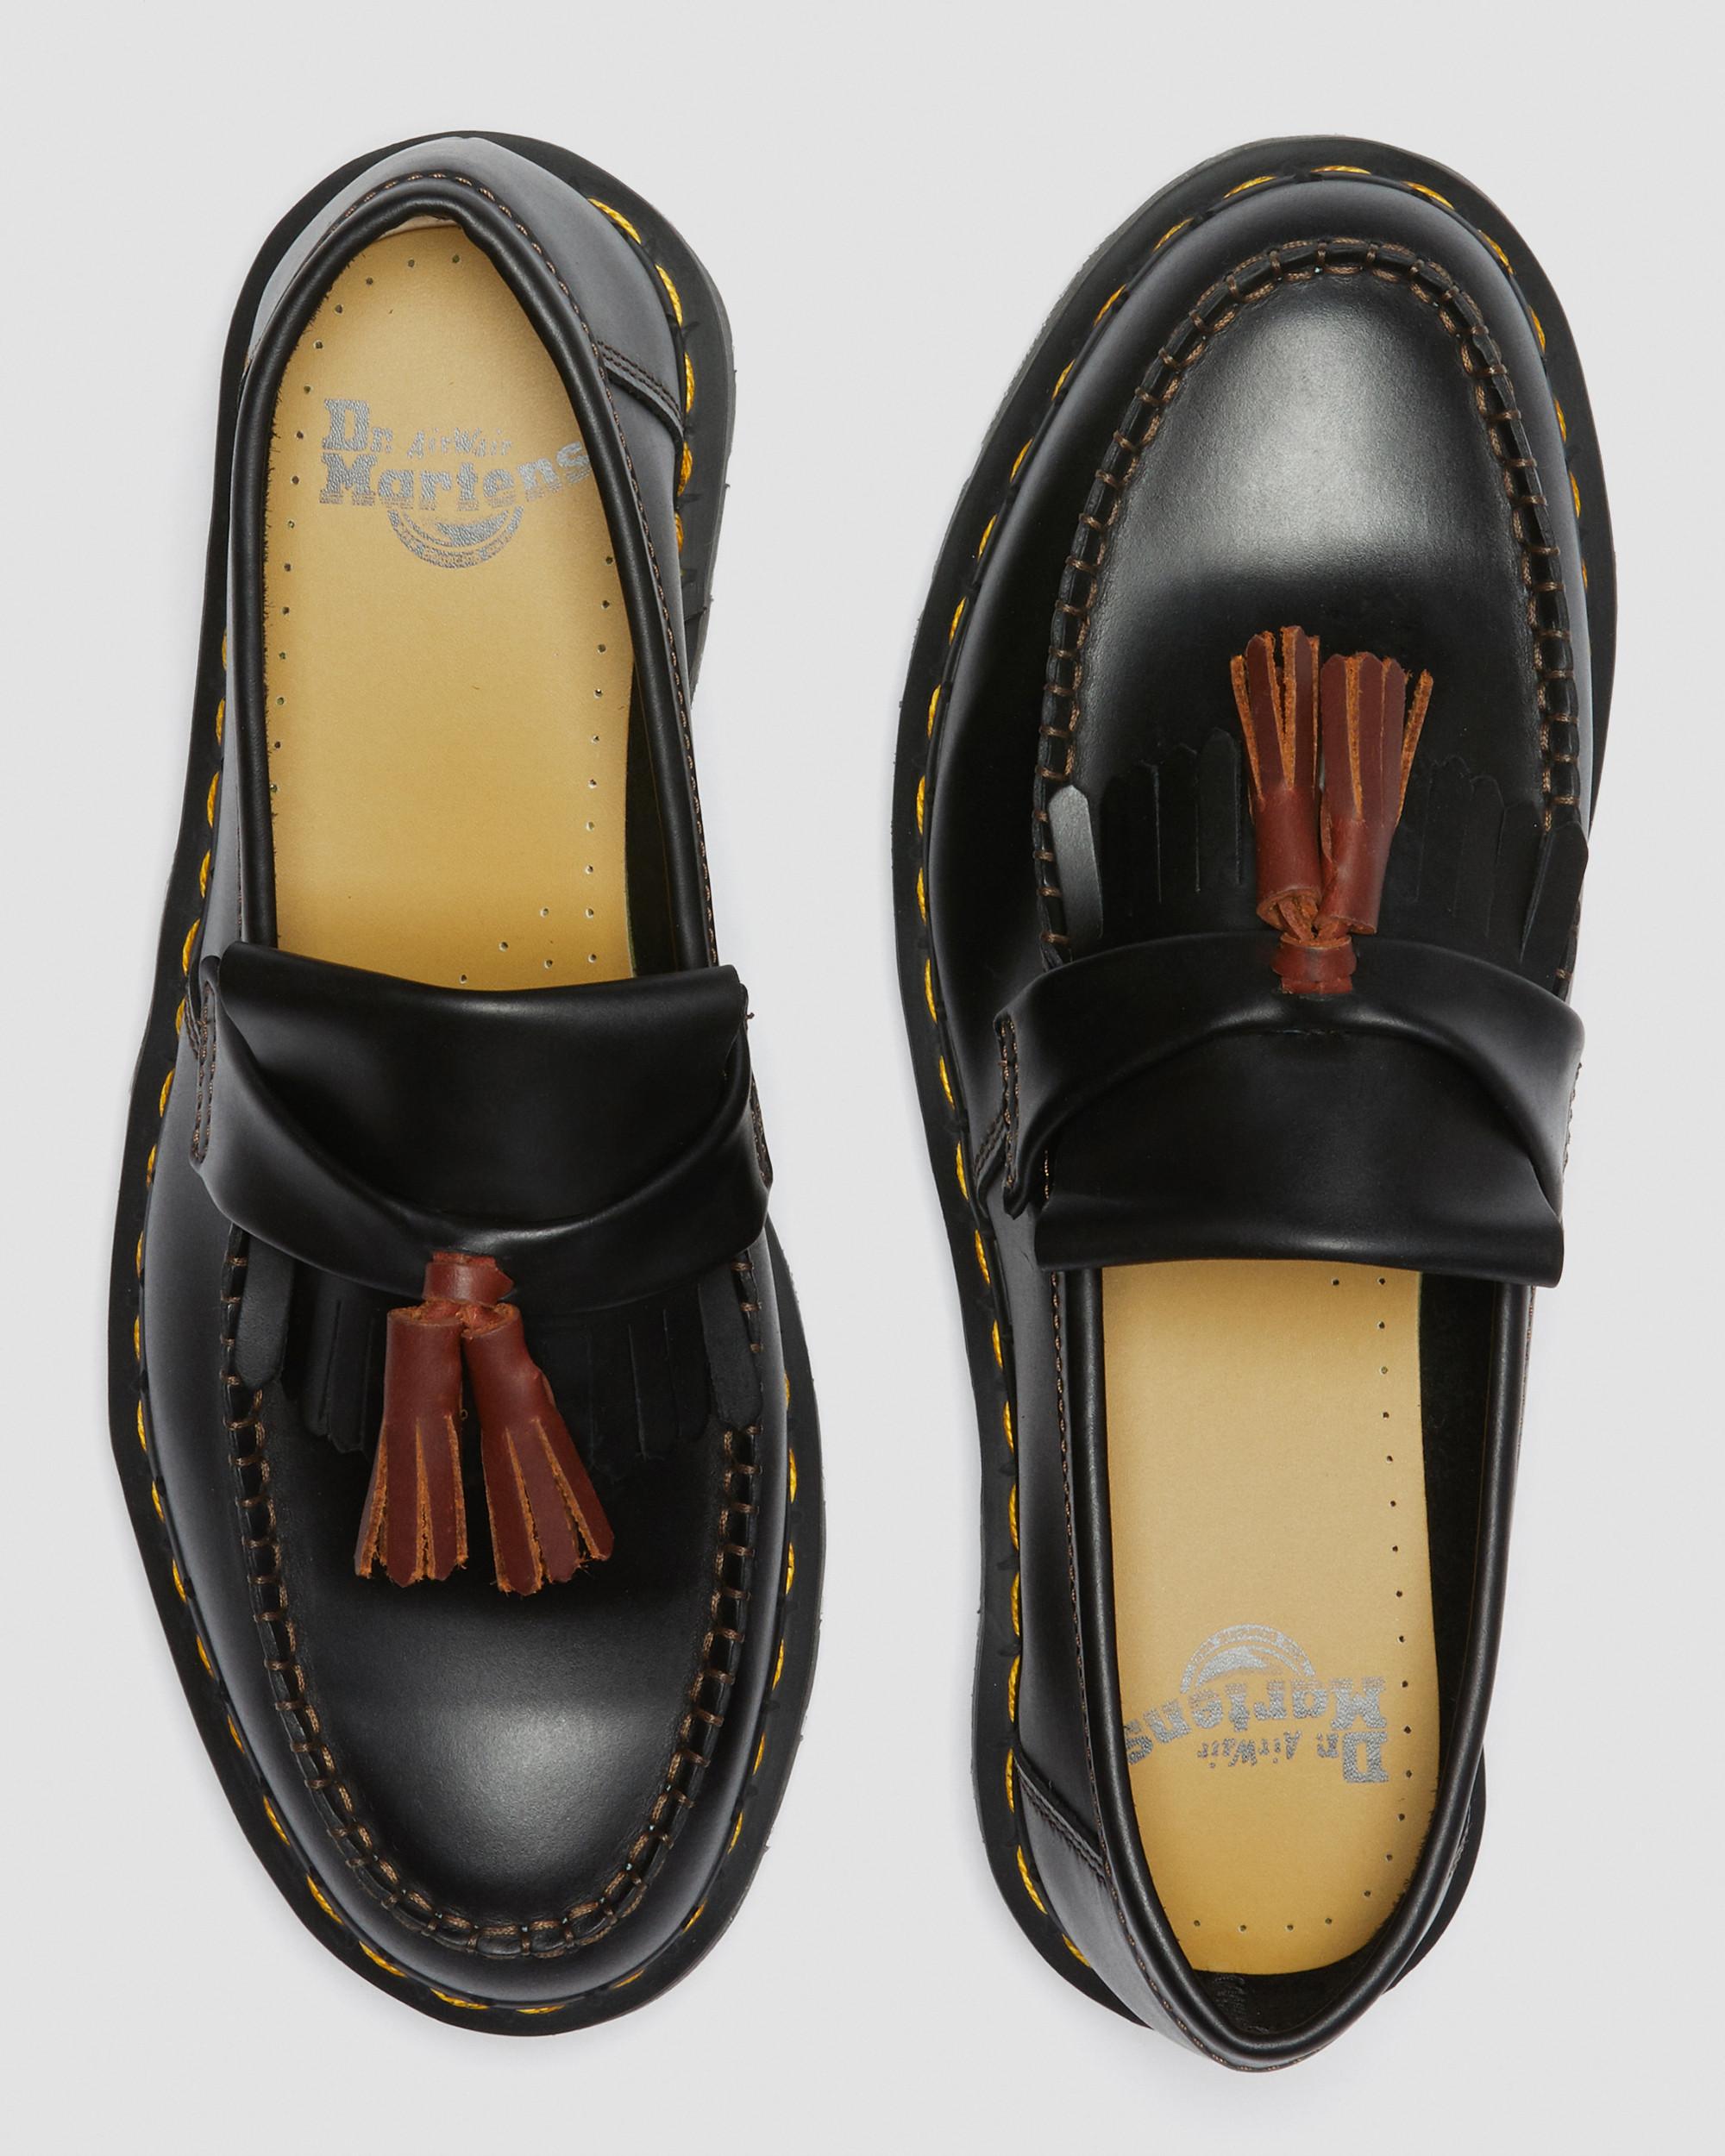 Adrian Leather Tassle Loafers Abruzzo in Black+Brown